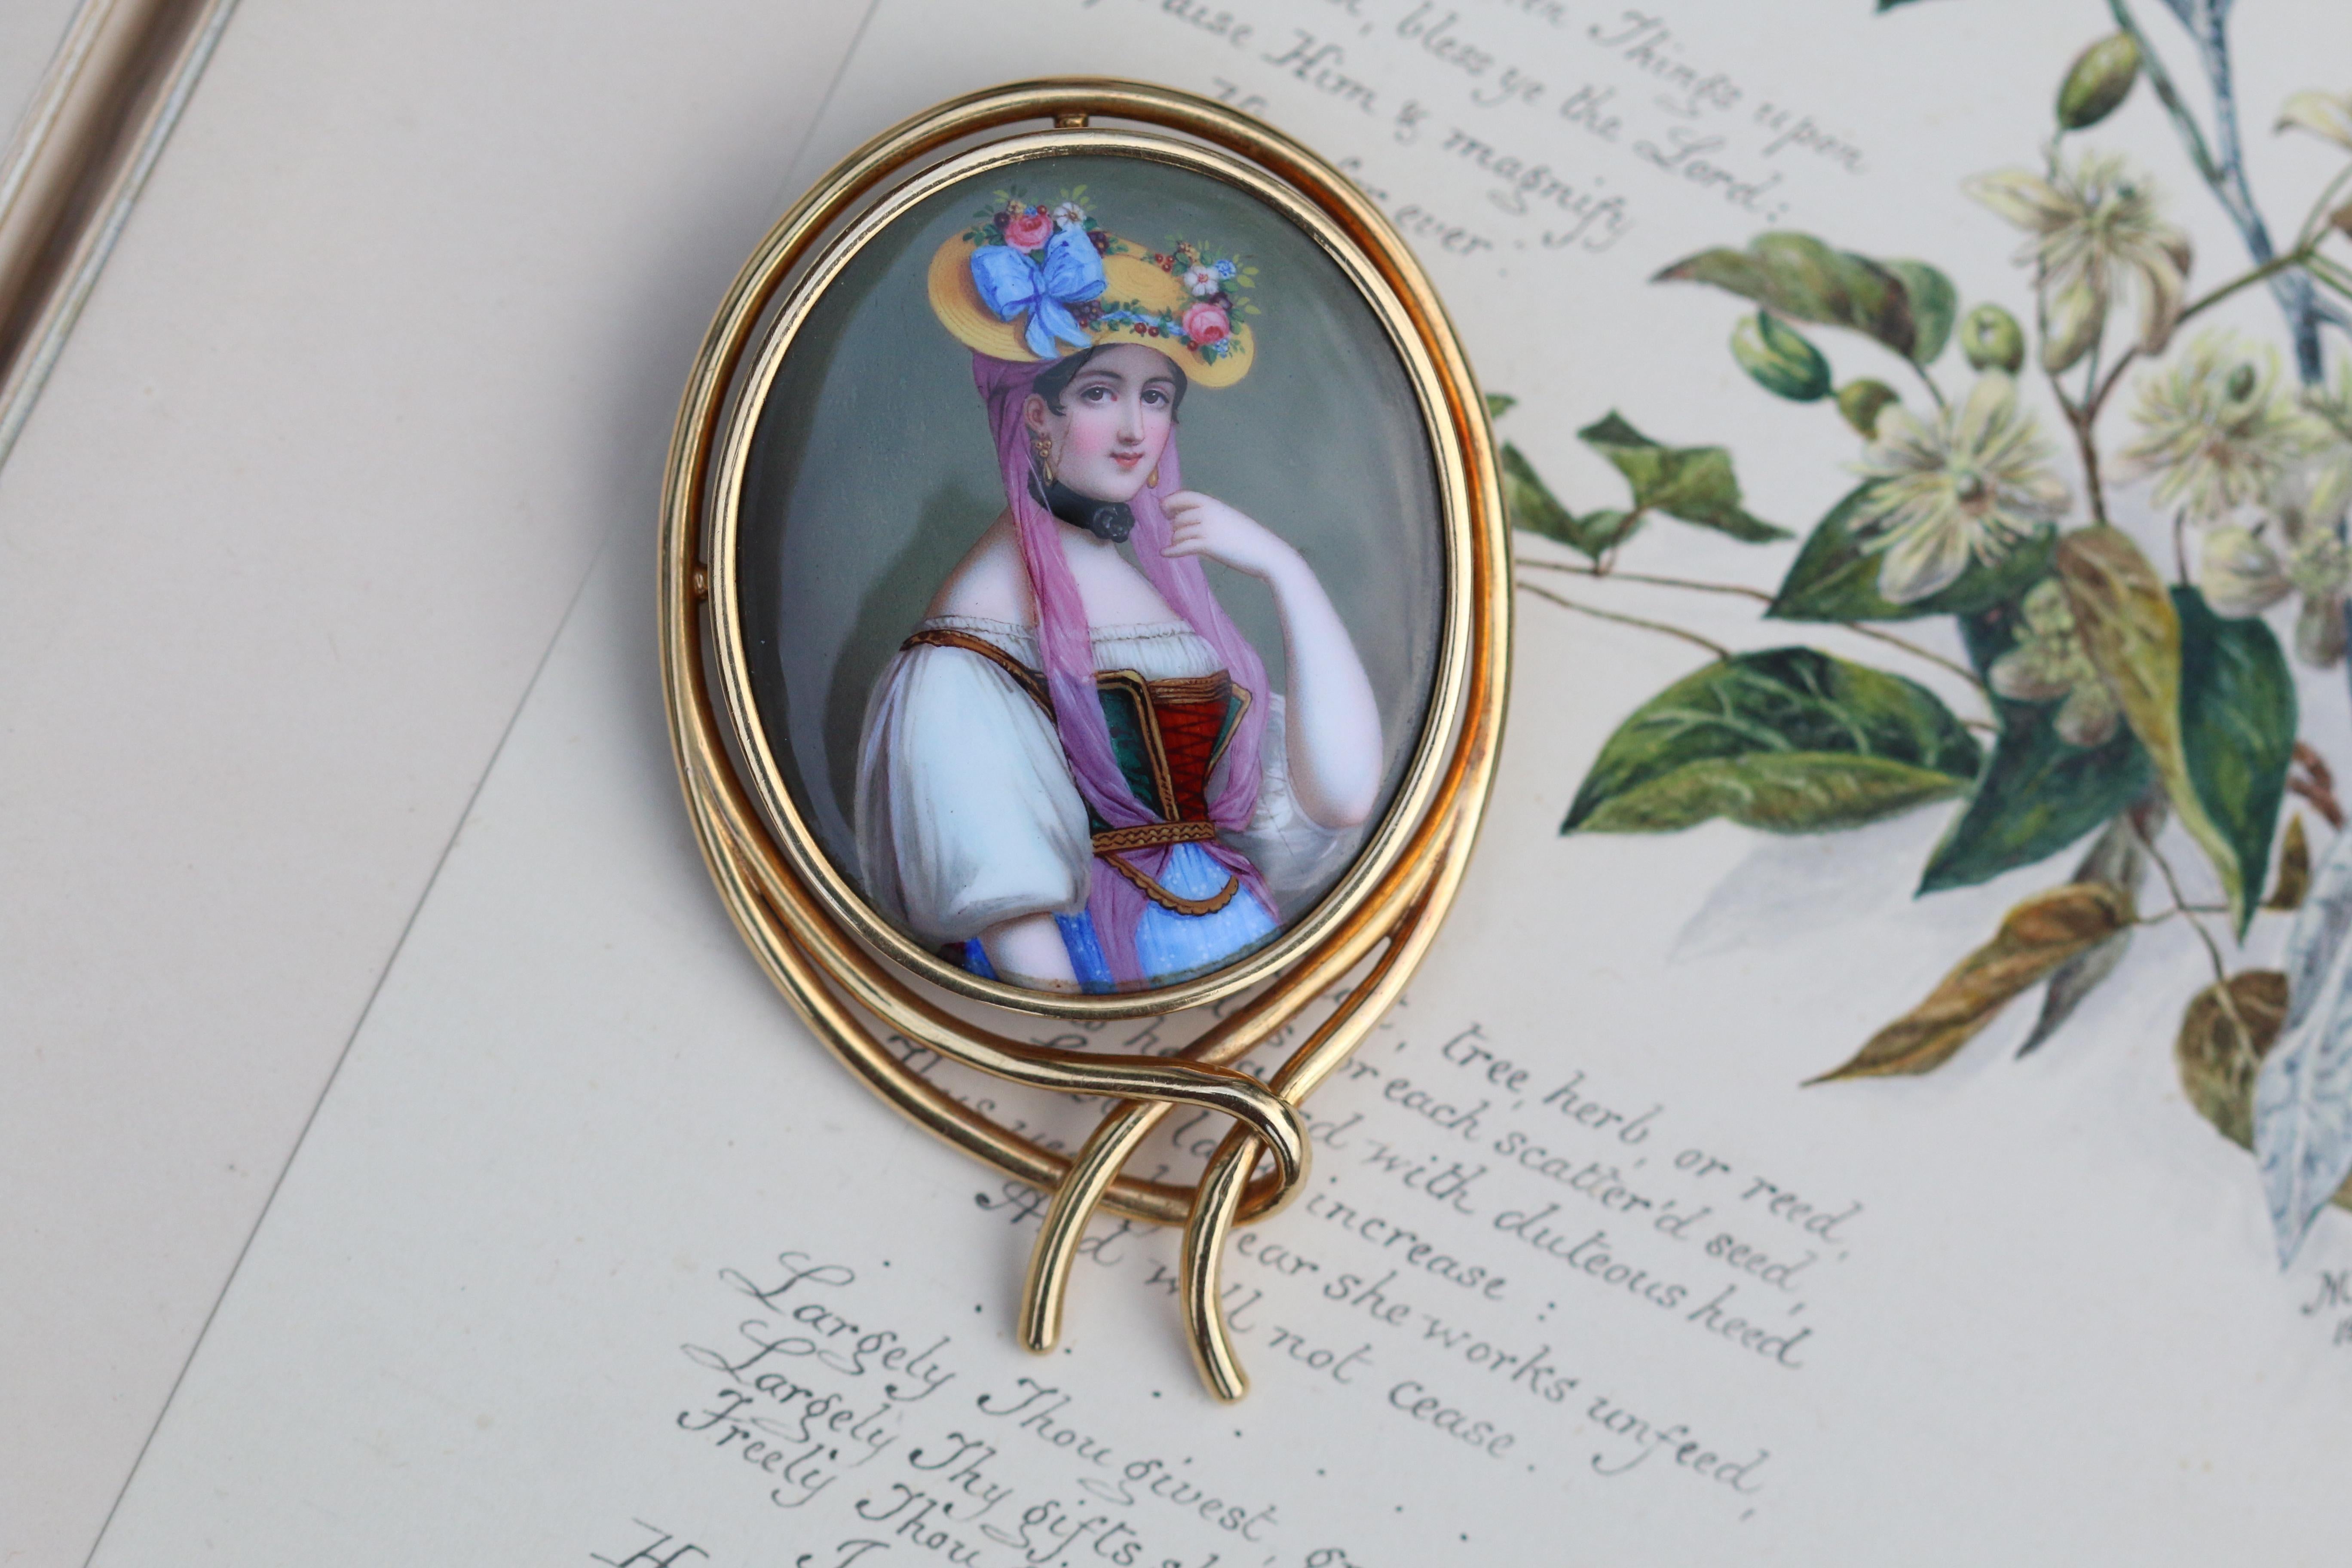 This absolutely breathtaking brooch has so much character, elegance and is simply a thing of beauty. A portrait of a woman wearing a woven hat painted on ceramic. Upon the hat is a wreath of flowers bursting with colours; pink, whites and blue